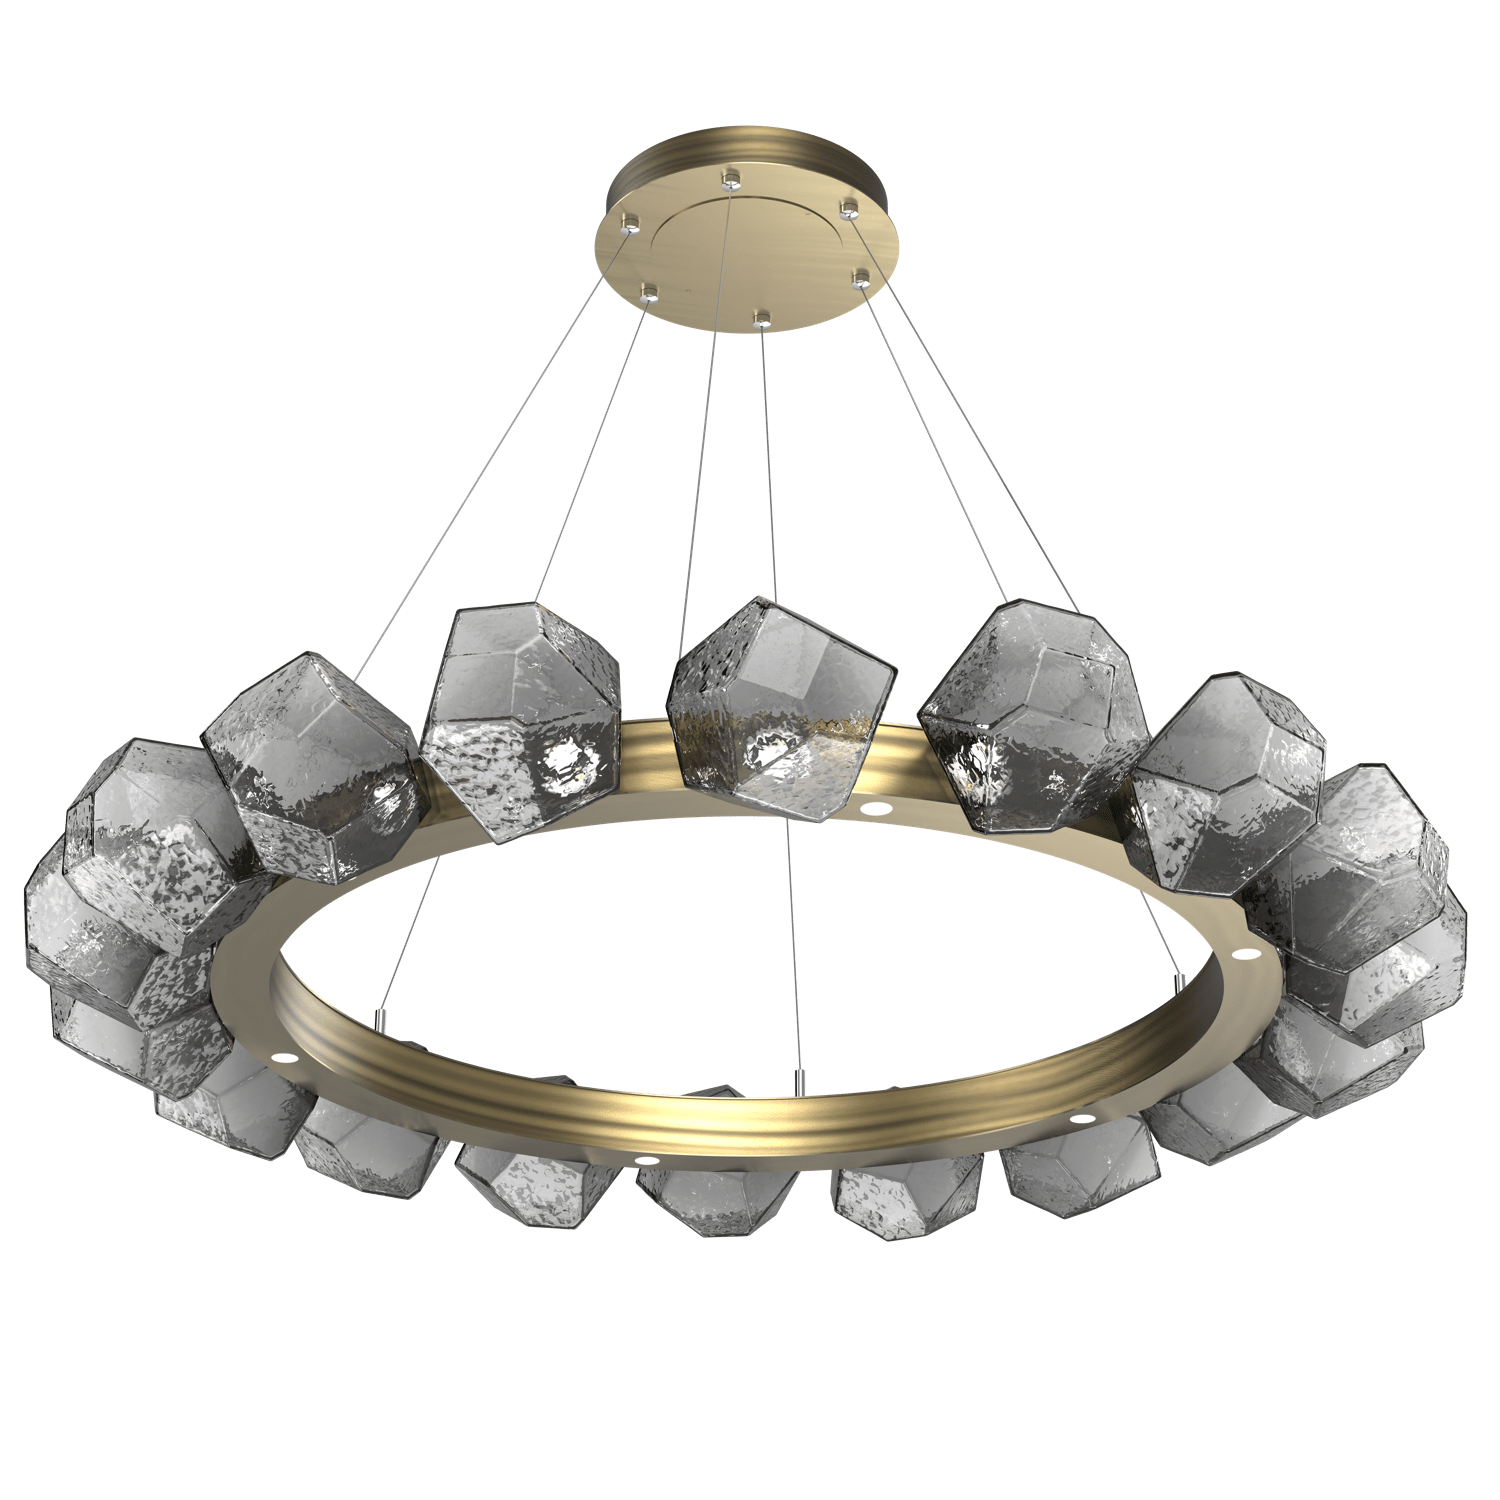 CHB0039-48-HB-S-Hammerton-Studio-Gem-48-inch-radial-ring-chandelier-with-heritage-brass-finish-and-smoke-blown-glass-shades-and-LED-lamping